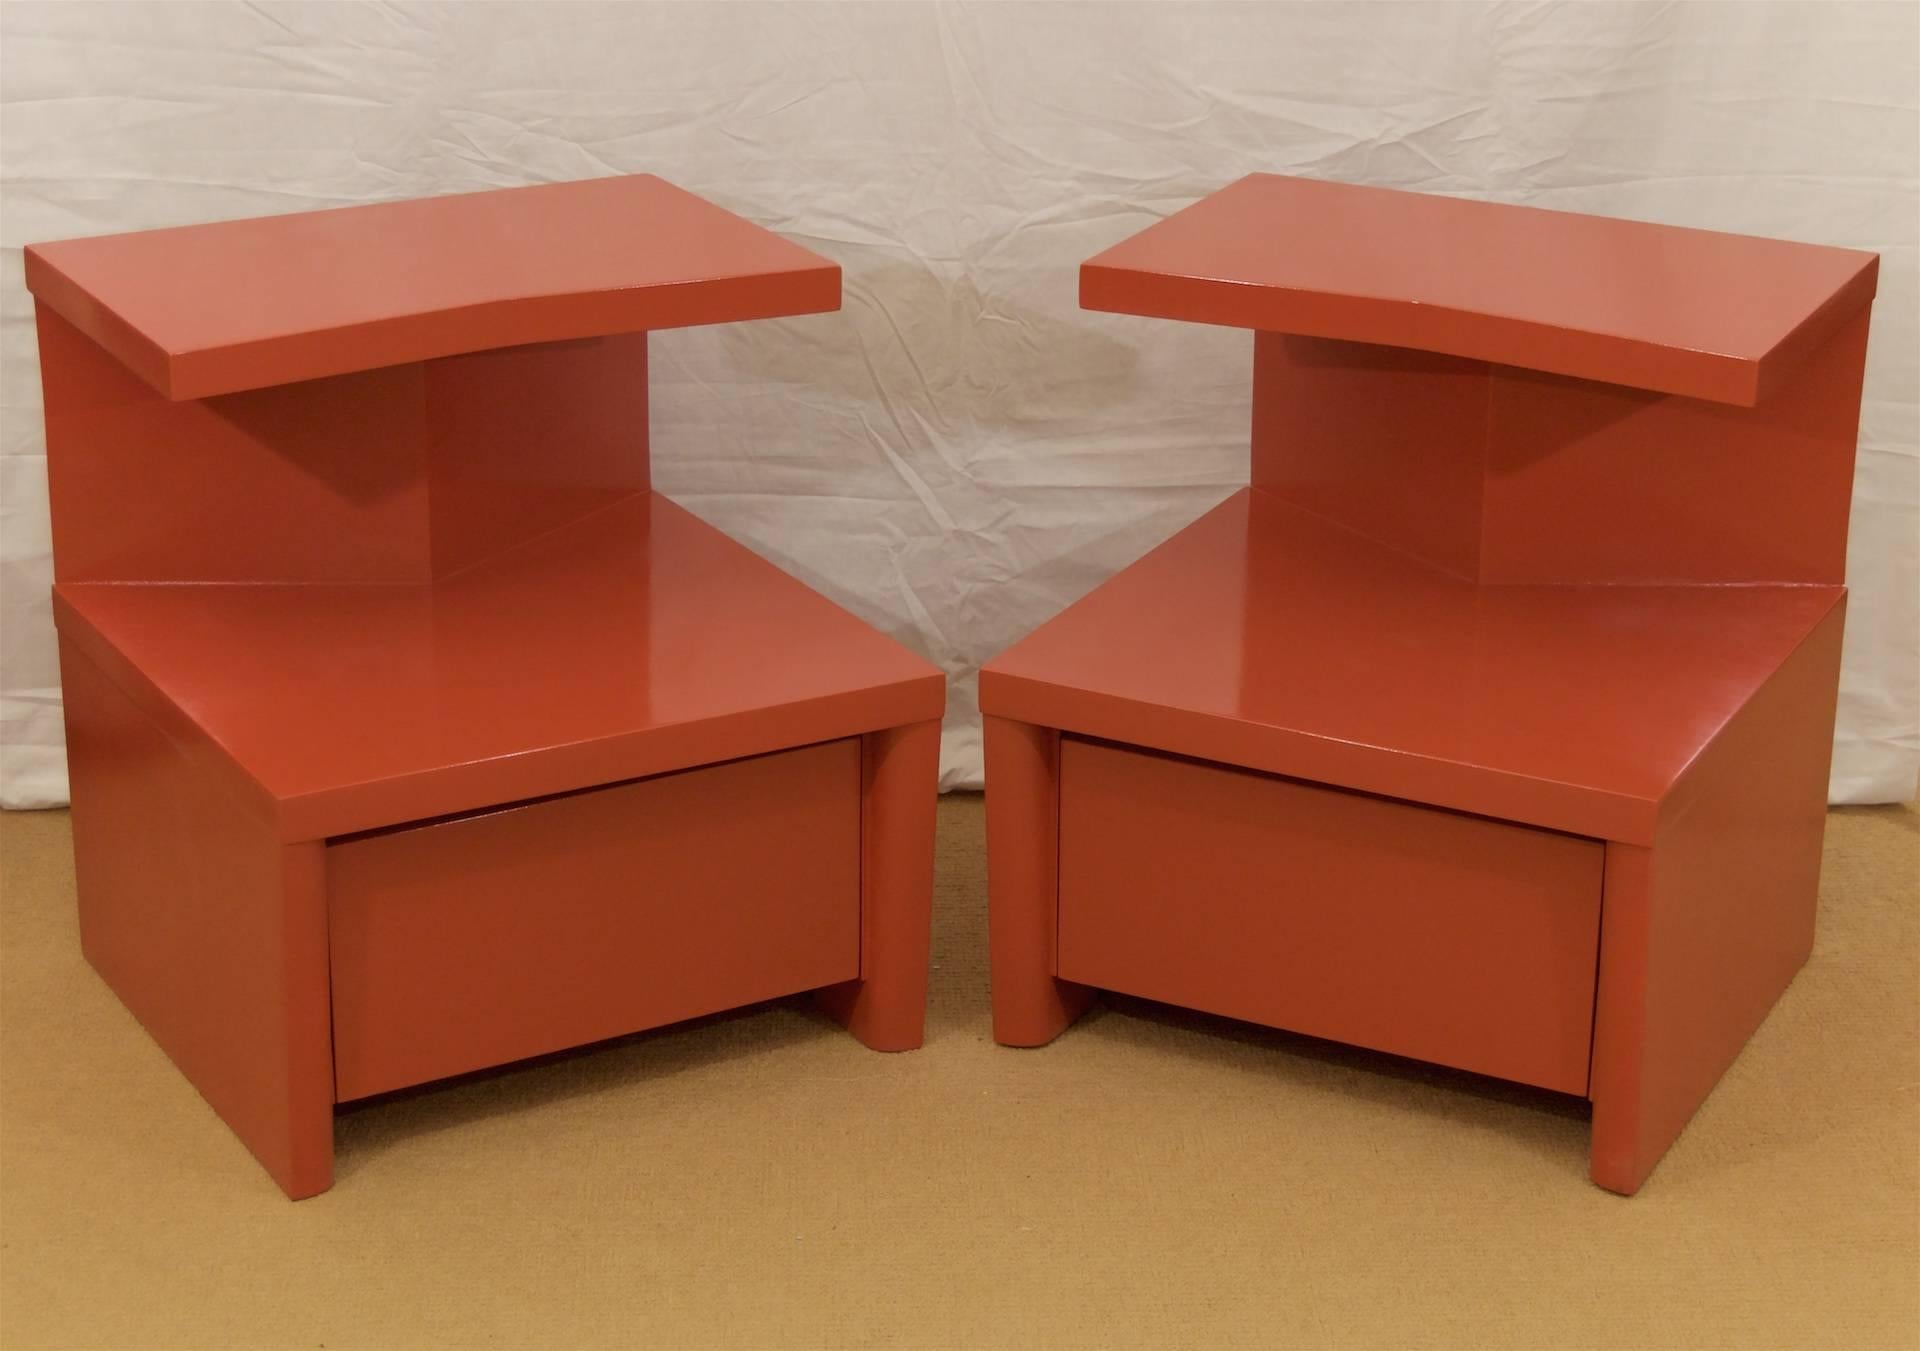 An excellent pair of angular nightstands, equally suited as end or side tables. The cantilevered top is supported by an angled top, with the lower portion housing a drawer for storage. Smoothly curved lines give geometric contrast to the